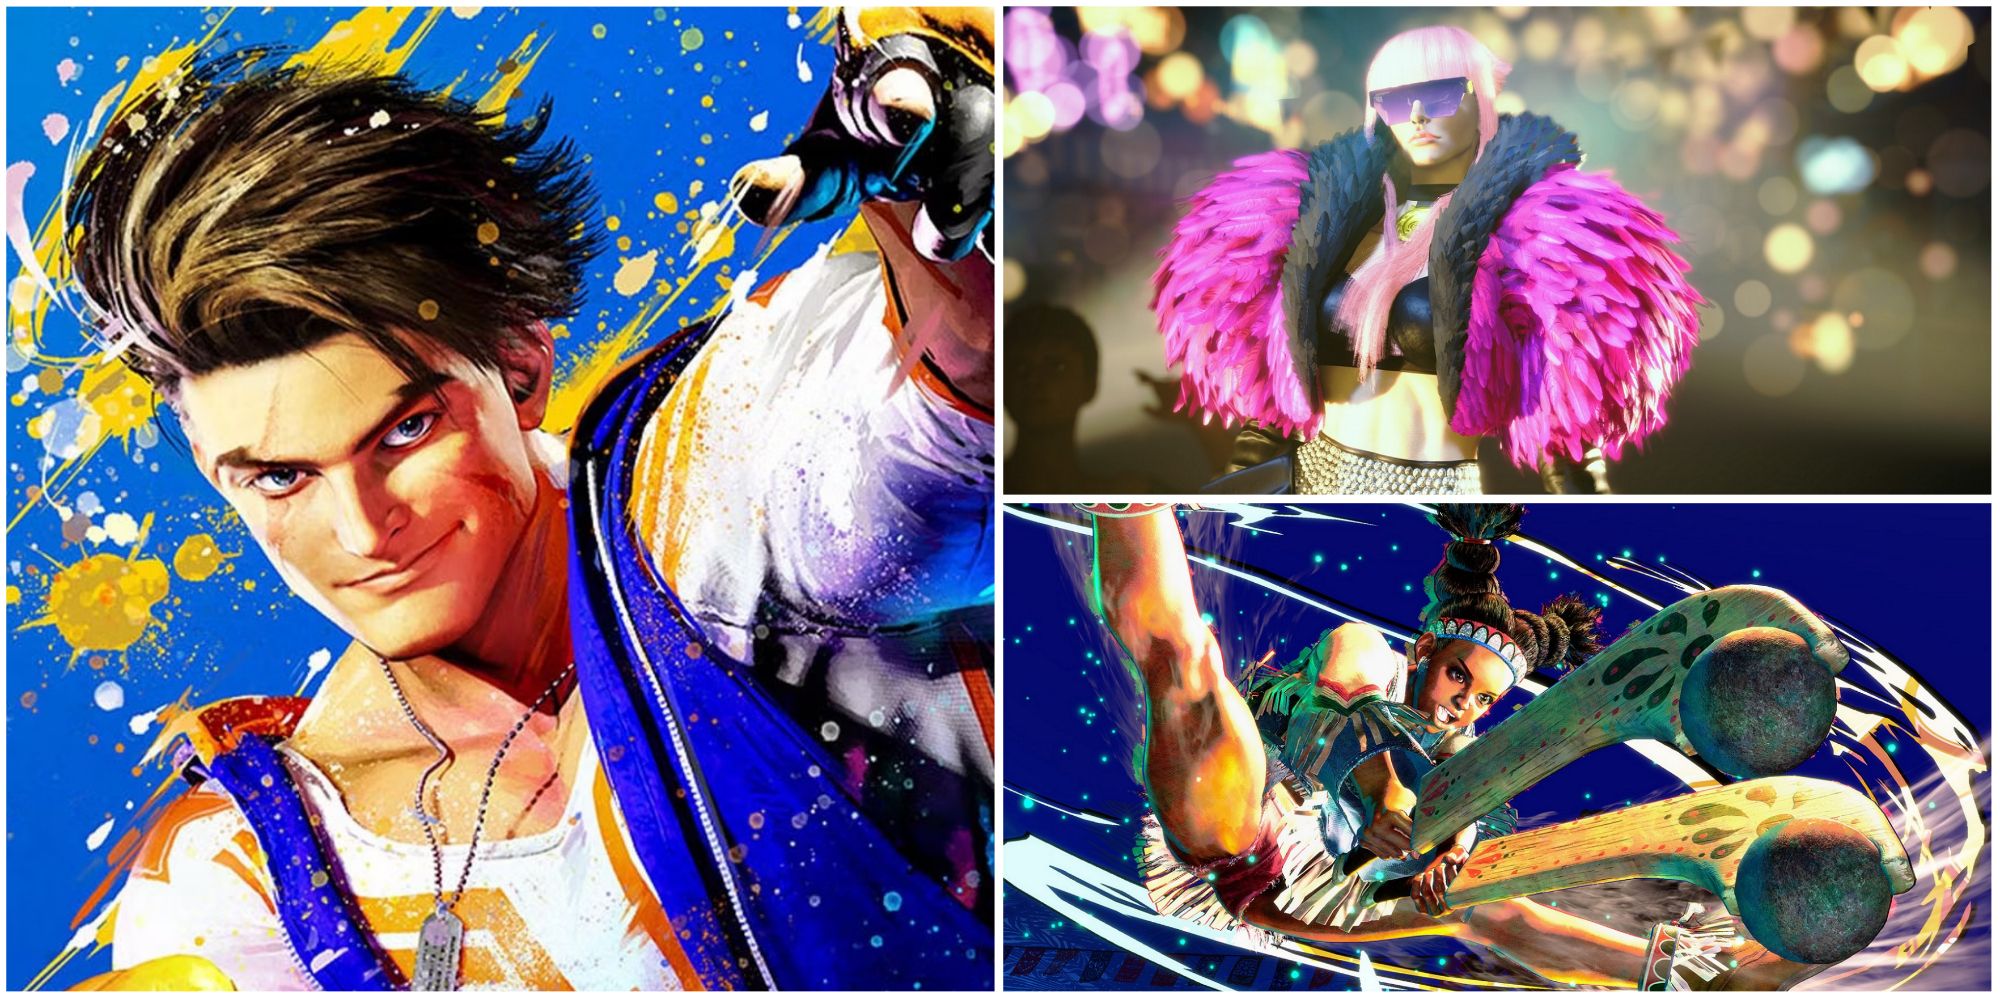 Street Fighter 6 Characters We Want To See Next - But Why Tho?